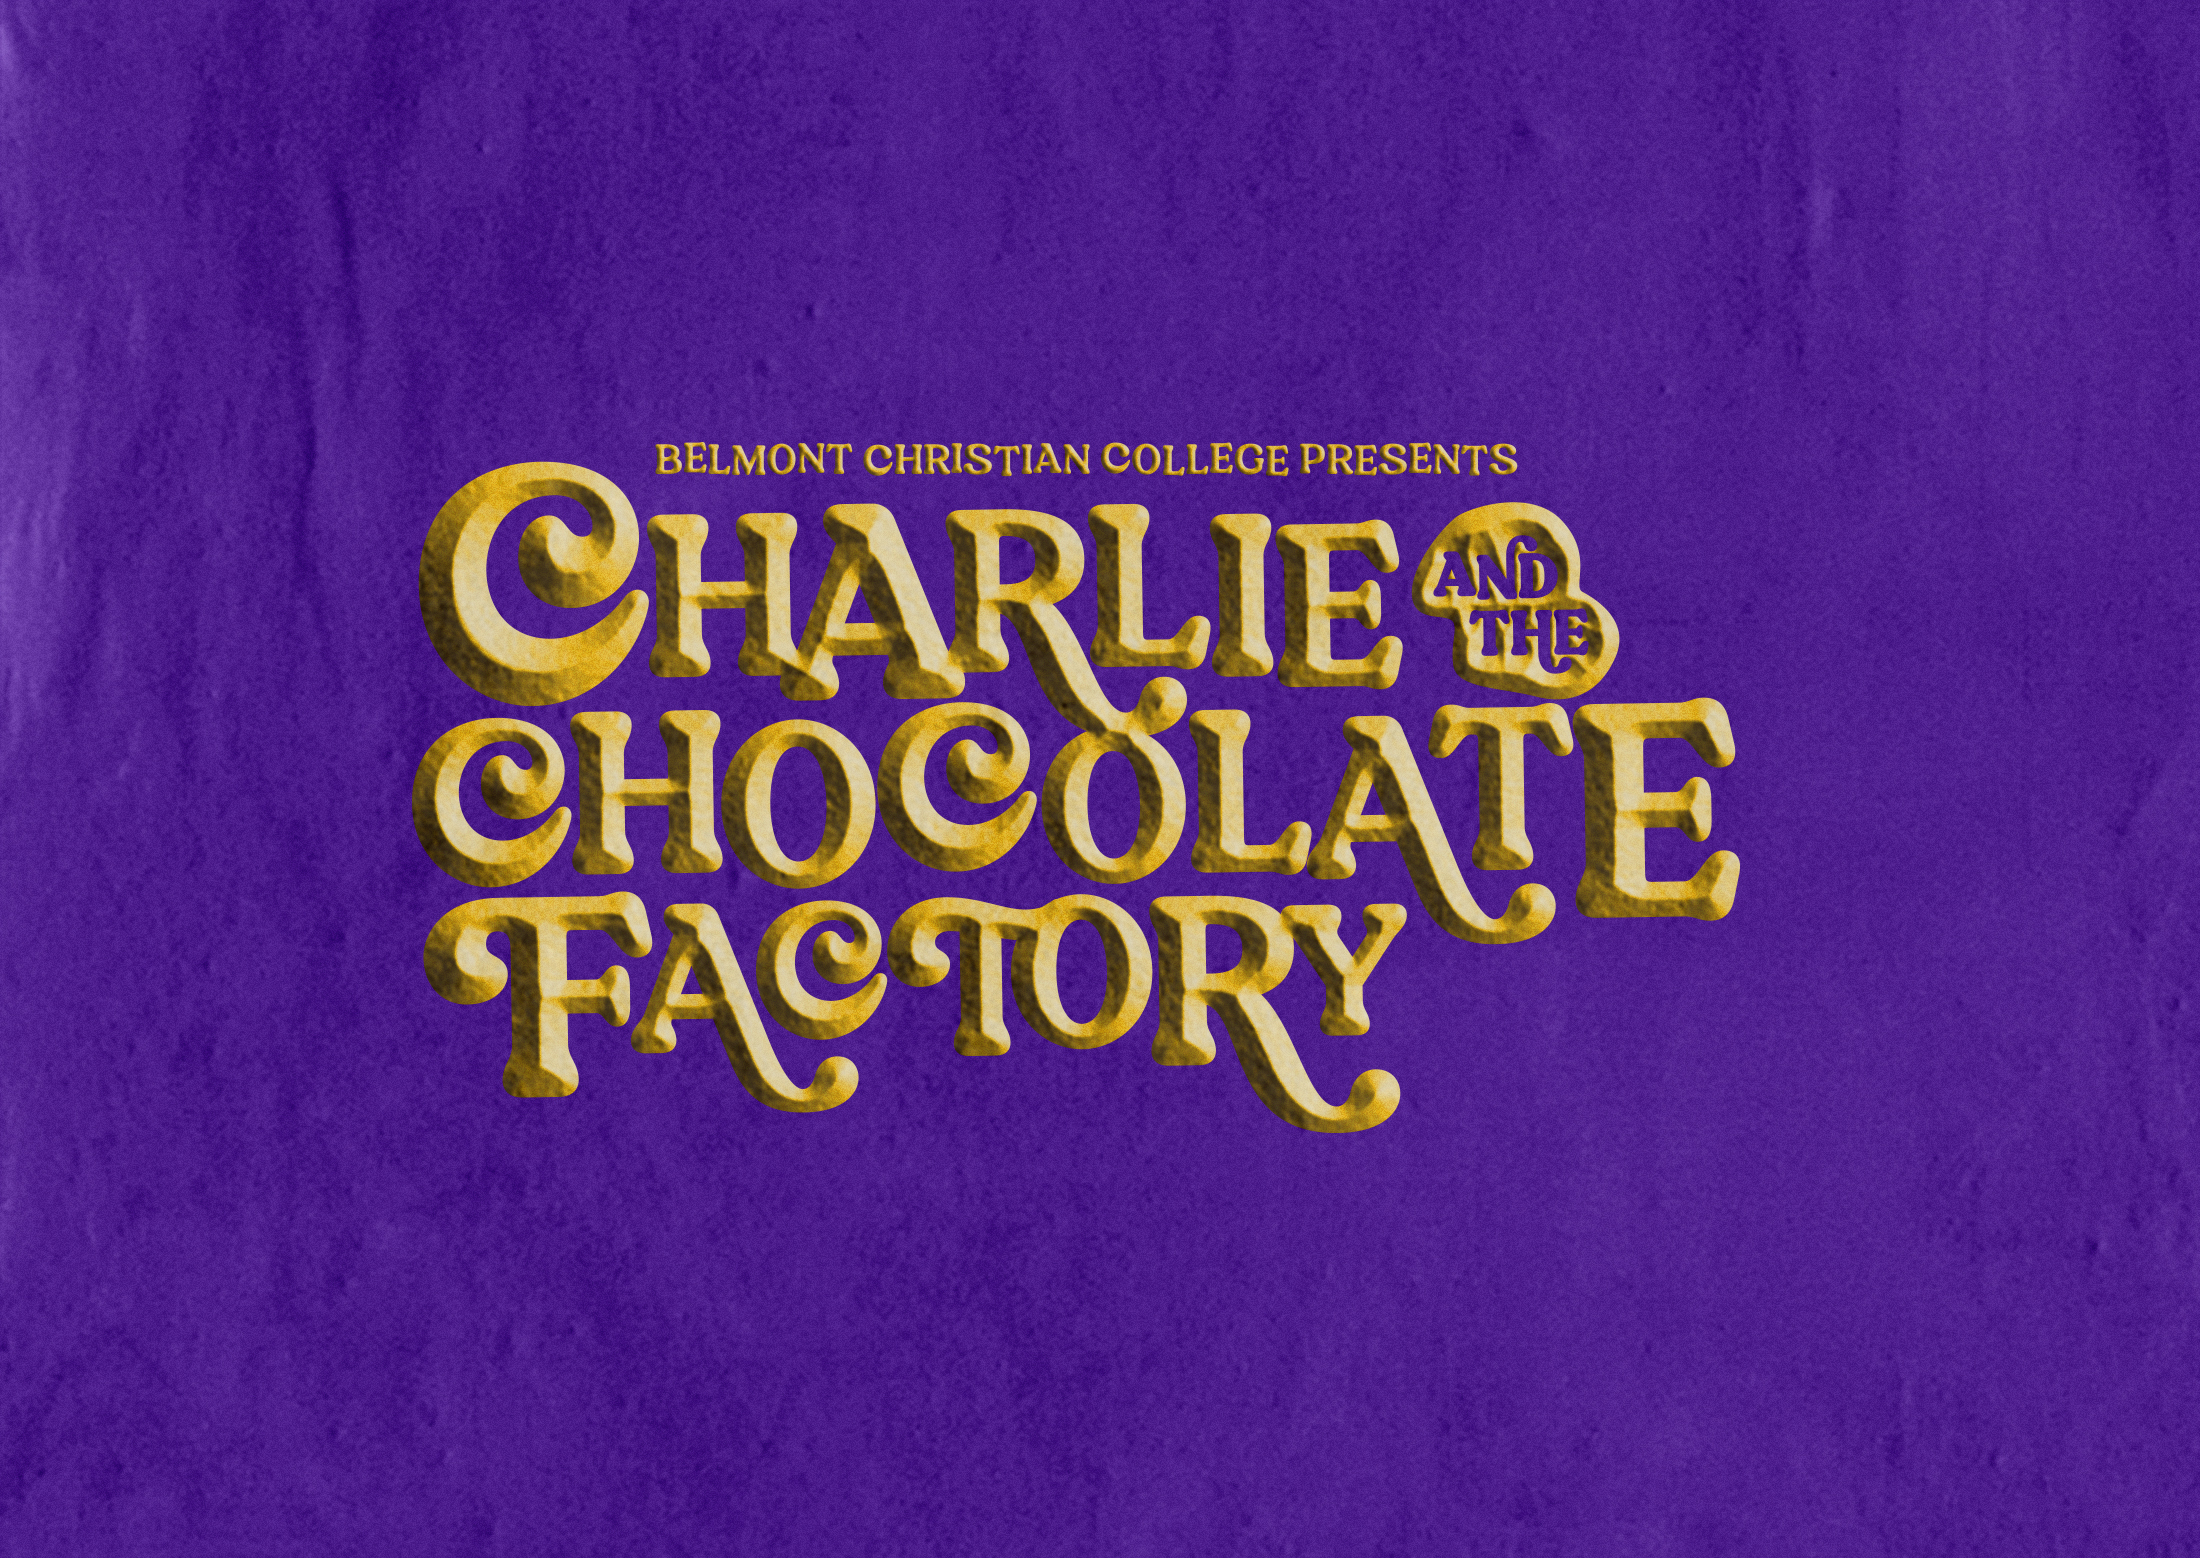 charlie and the chocolate factory - the new musical